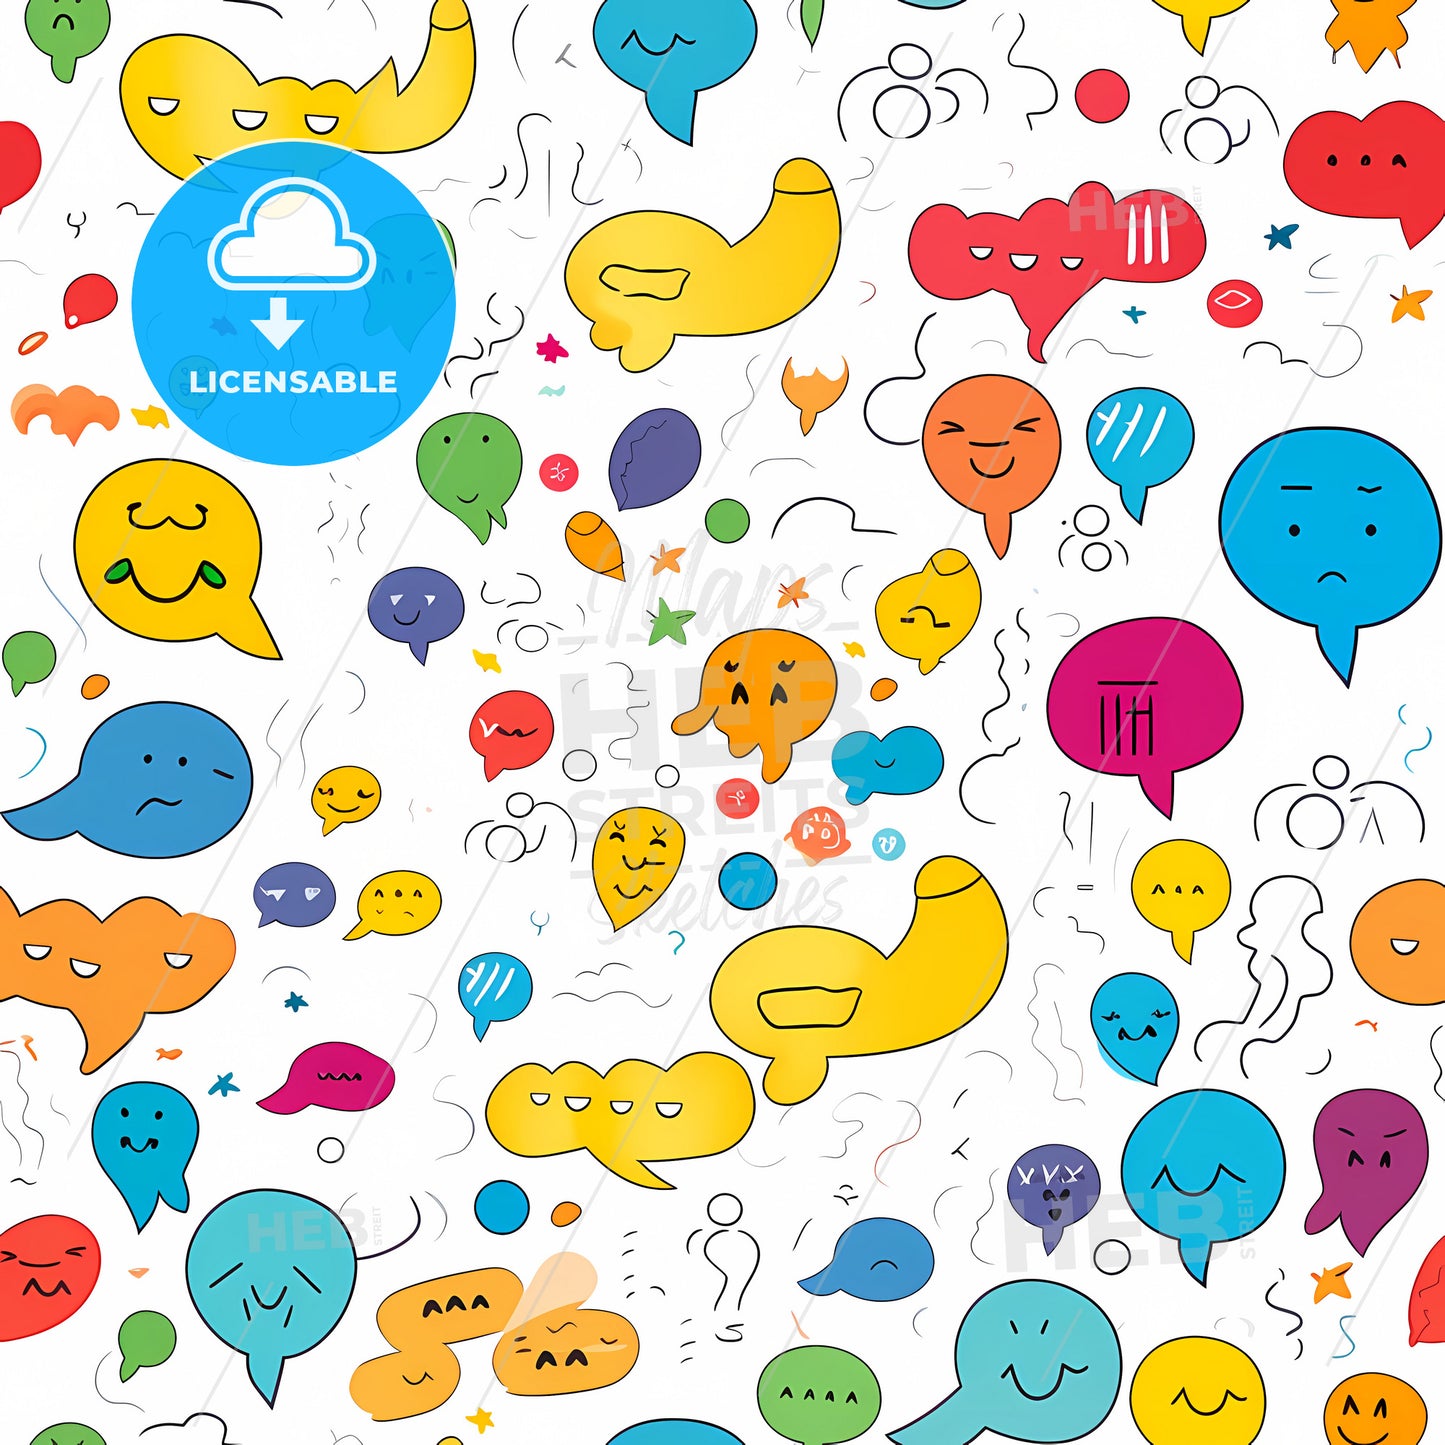 Diverse Colorful Chat Bubble Set, A Group Of Colorful Cartoon Faces